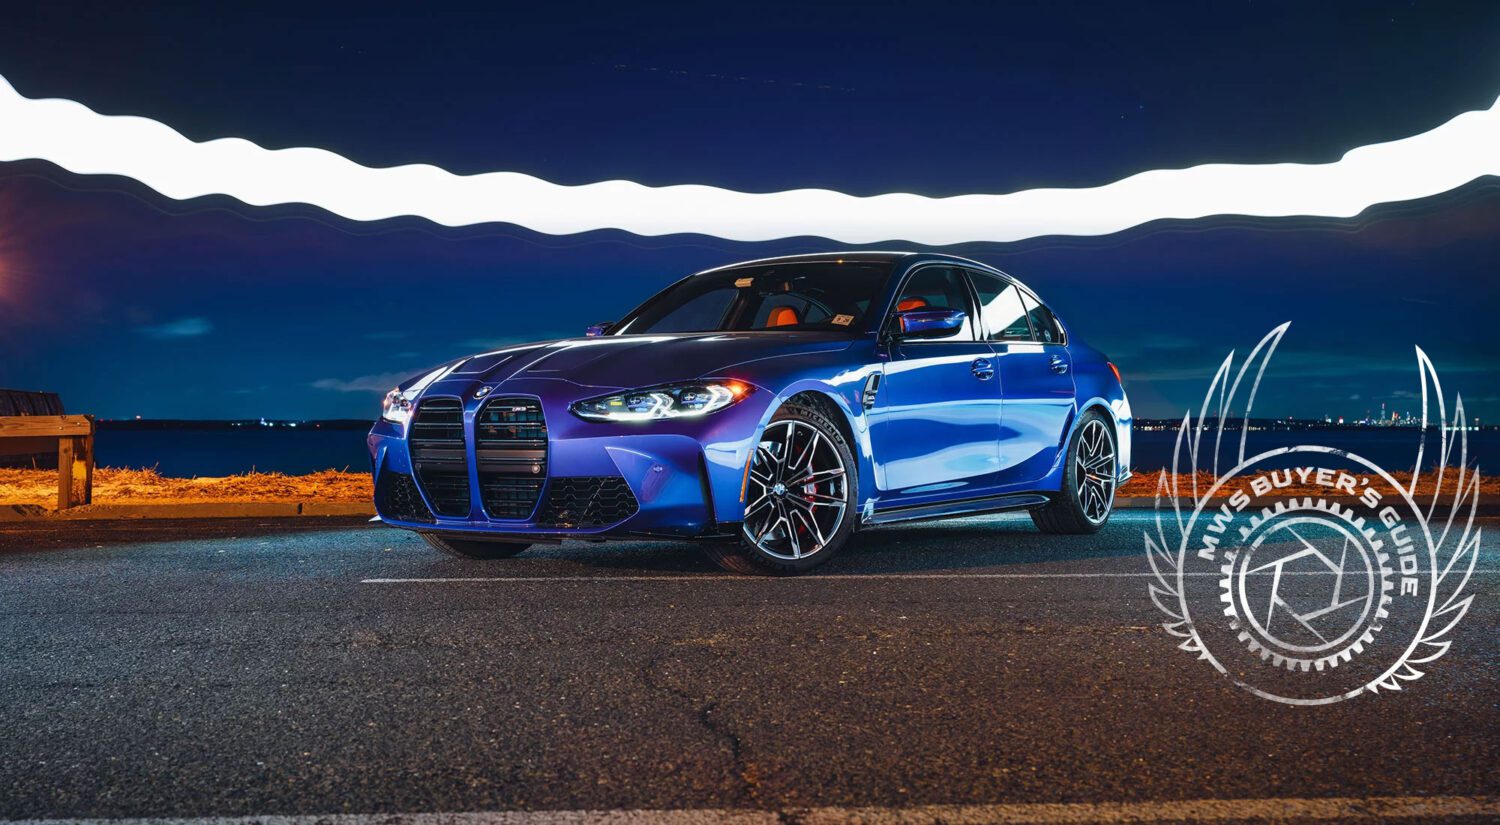 The 2022 BMW M3 Buyer's Guide